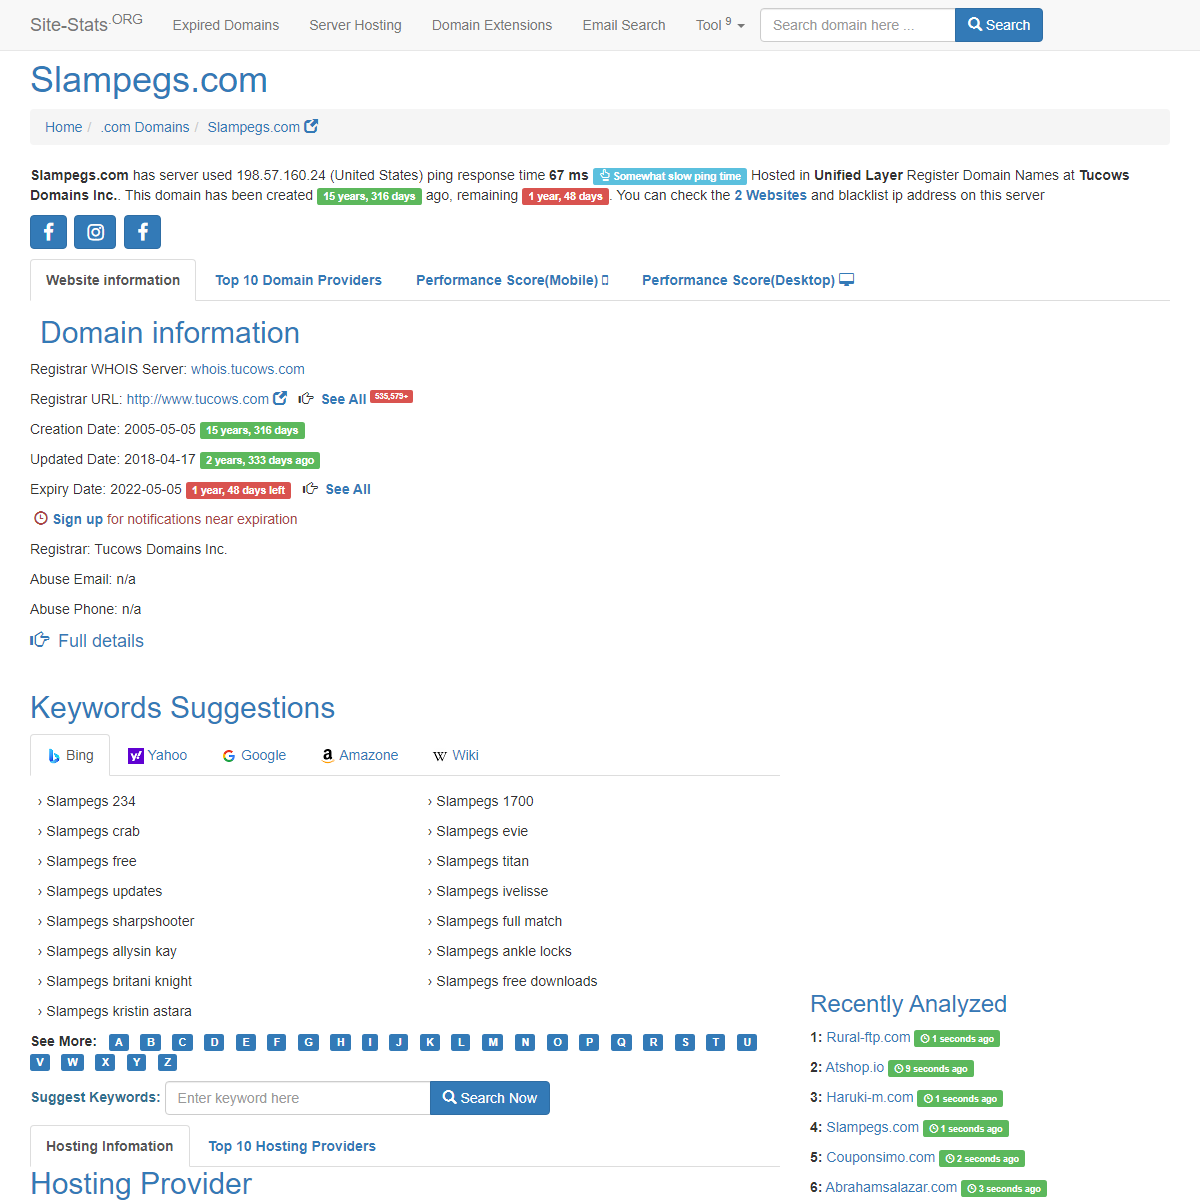 A complete backup of https://site-stats.org/slampegs.com/